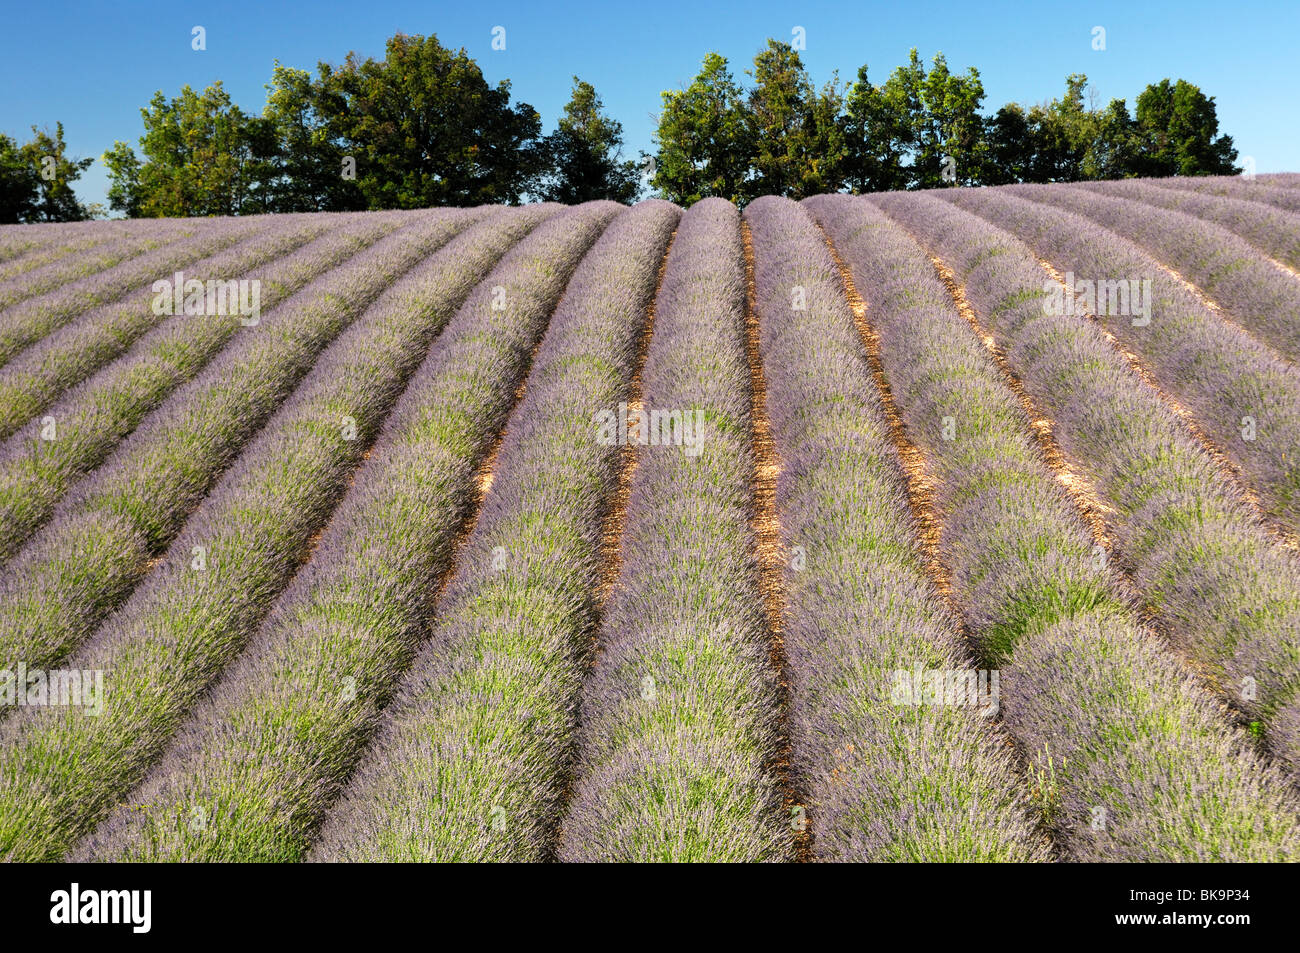 Row cultivation of lavender near Sault, Provence, France Stock Photo